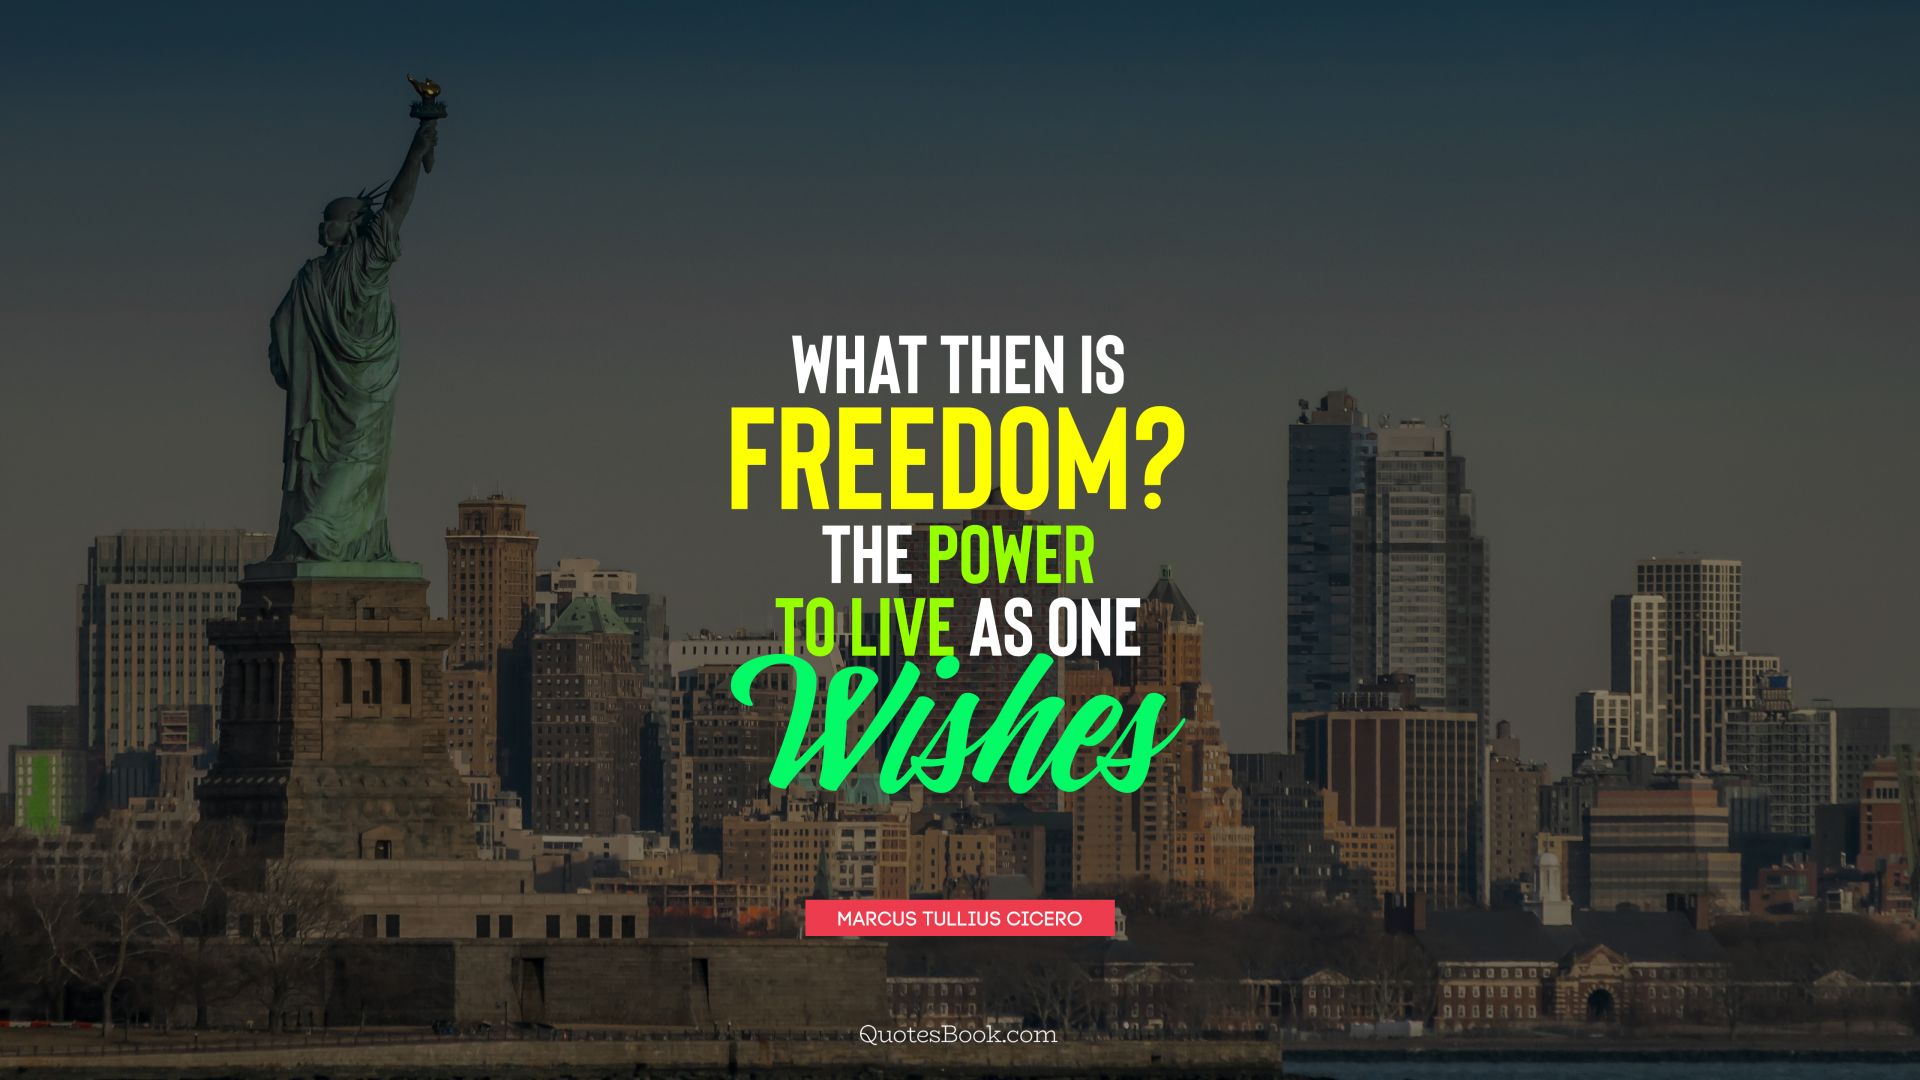 What then is freedom? The power to live as one wishes. - Quote by Marcus Tullius Cicero